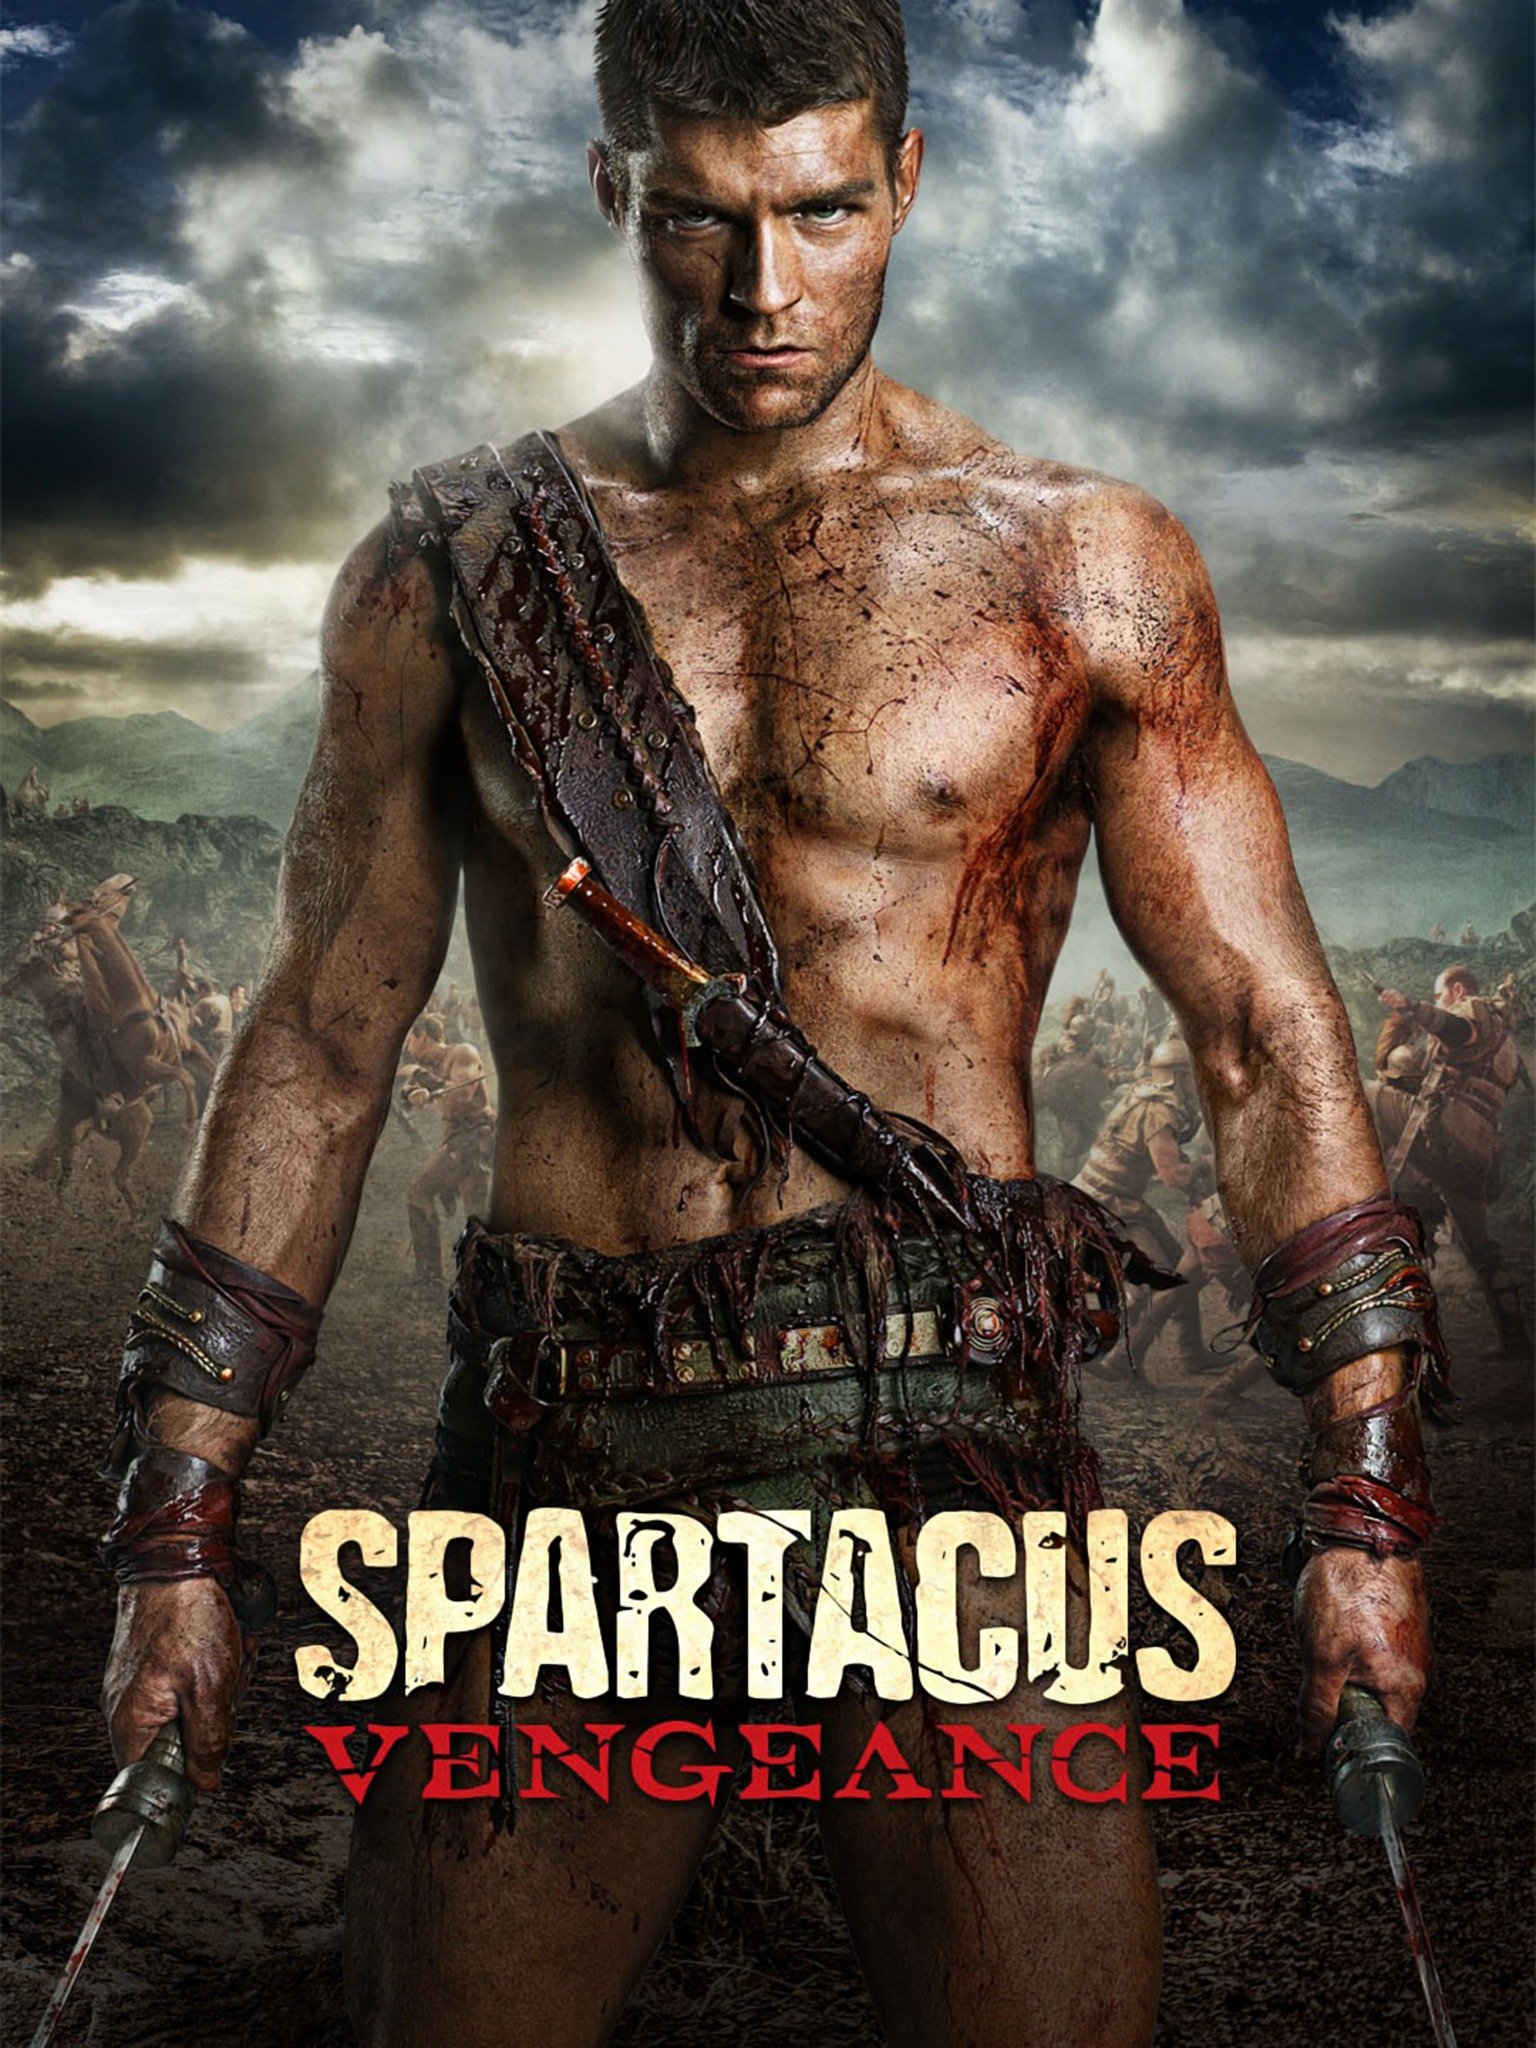 spartacus: blood and sand film